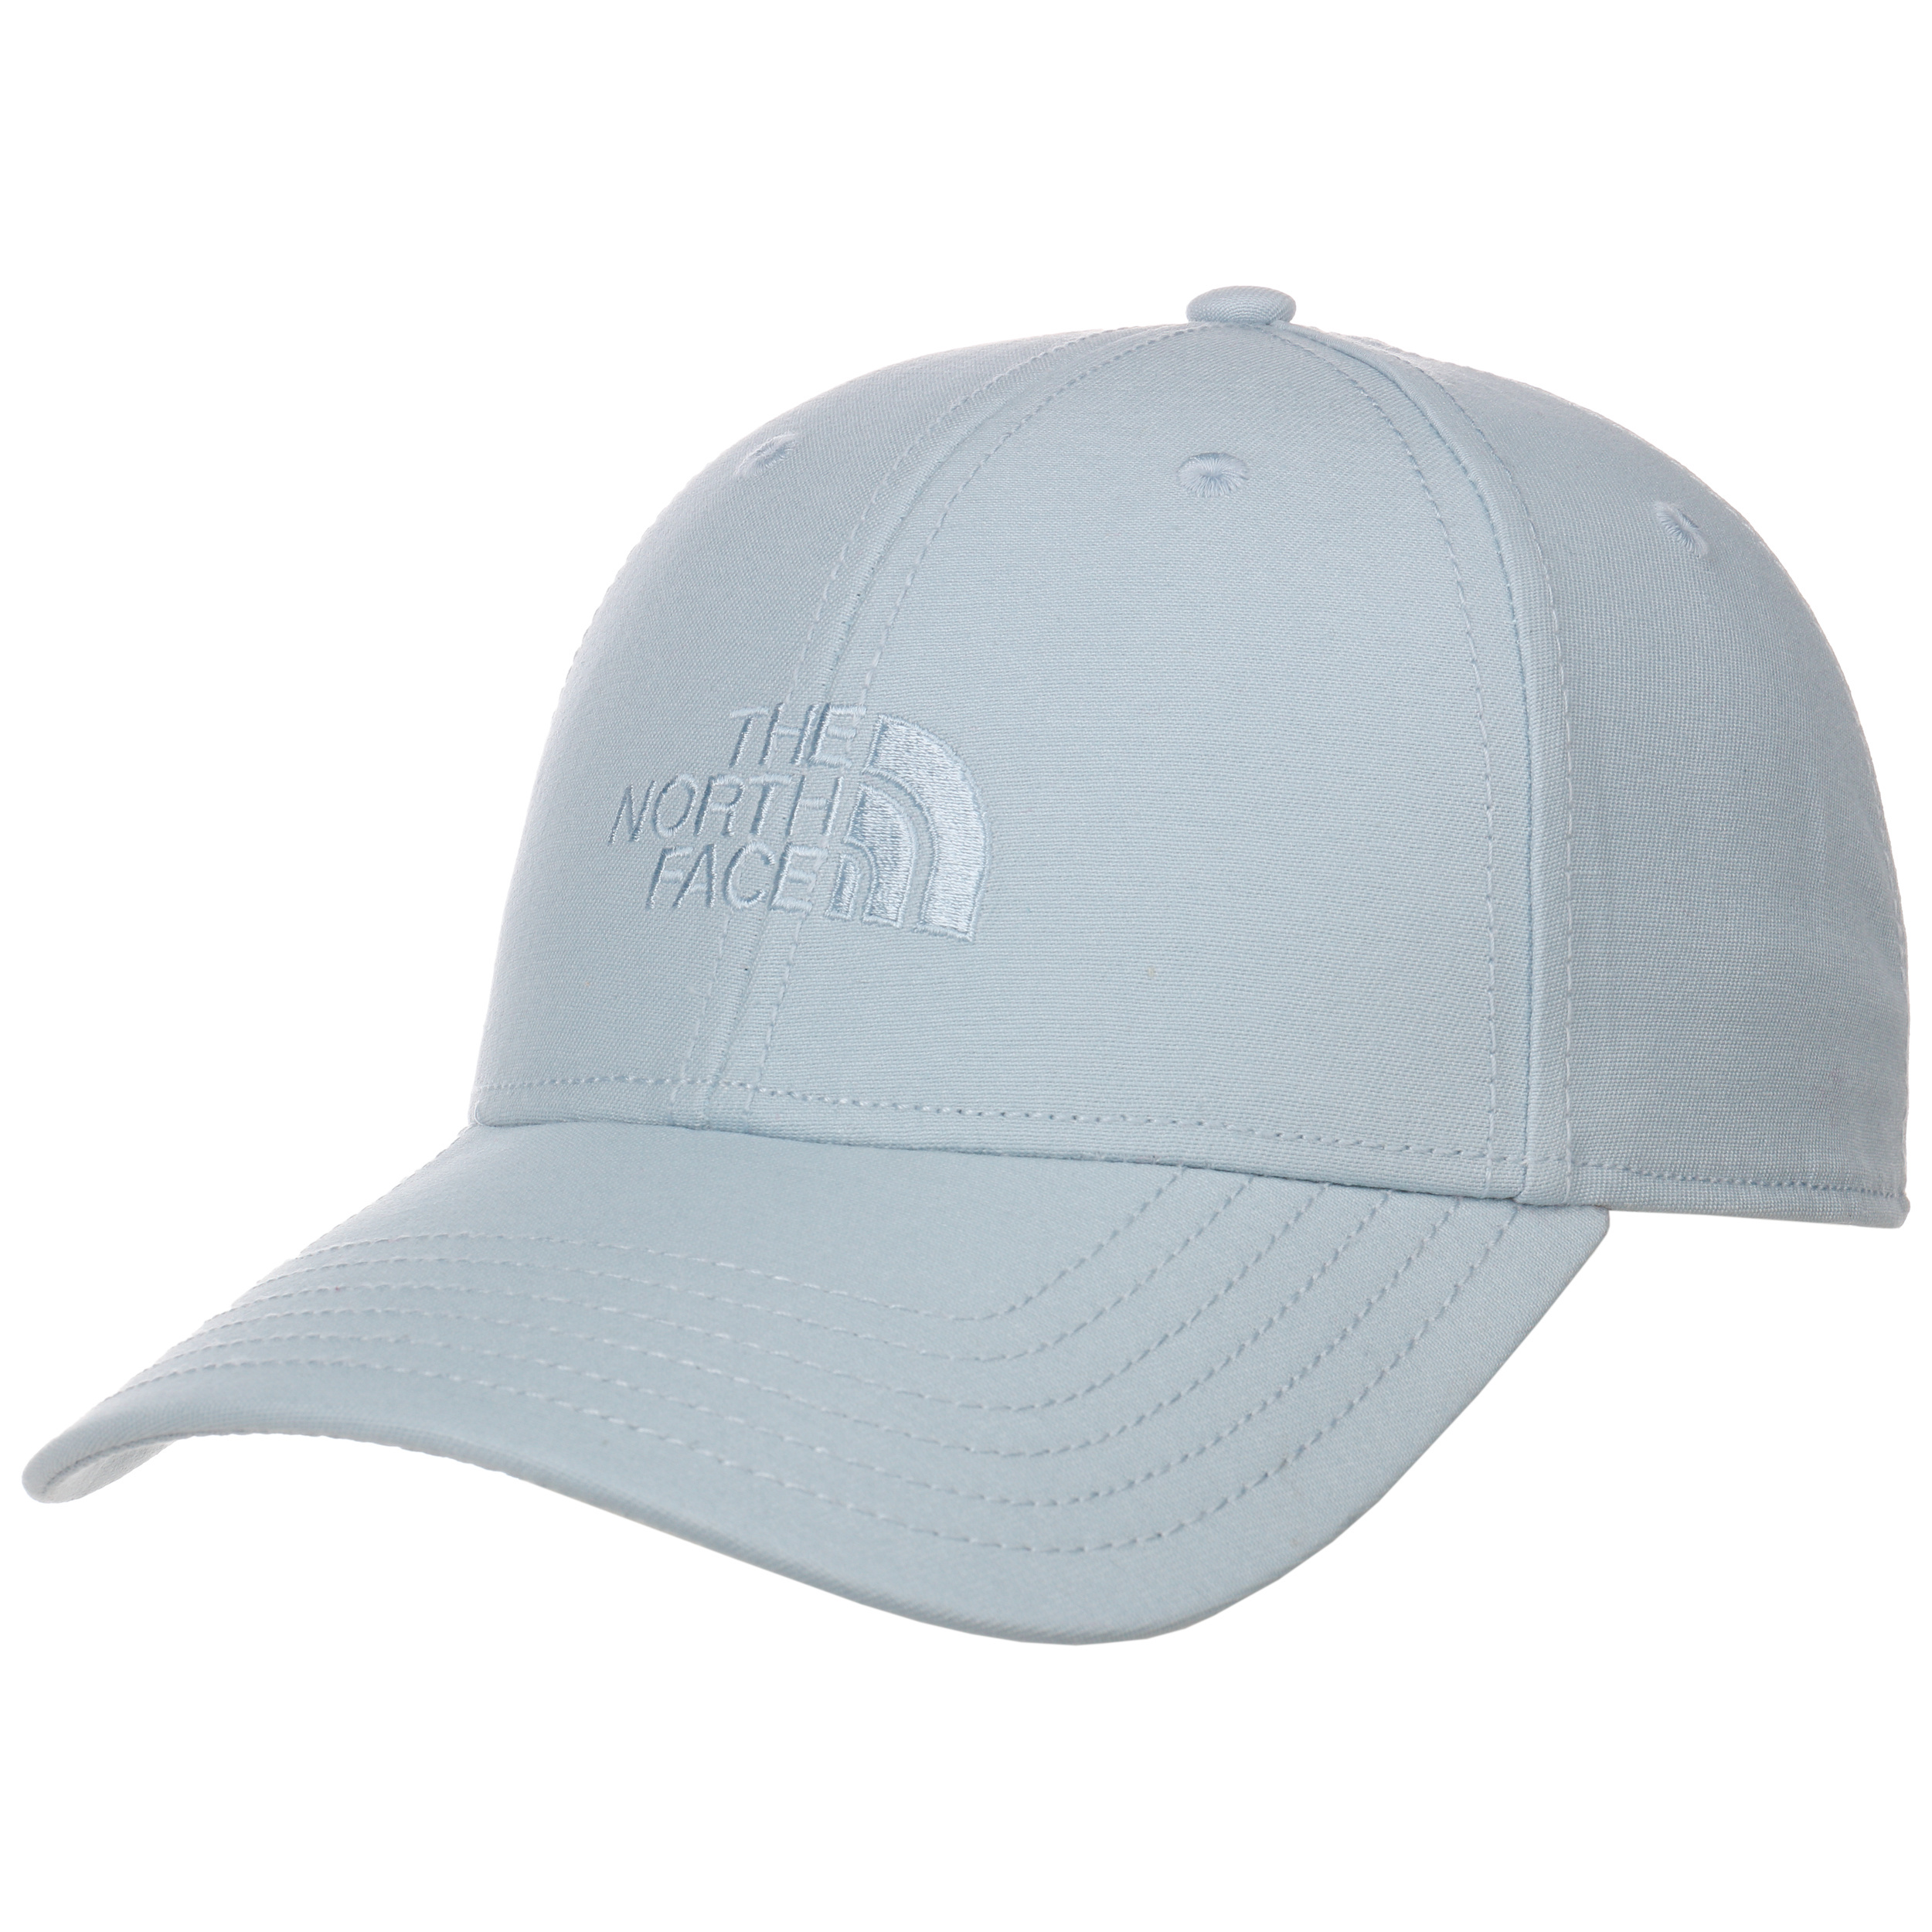 66 Classic Cap By The North Face 26 95